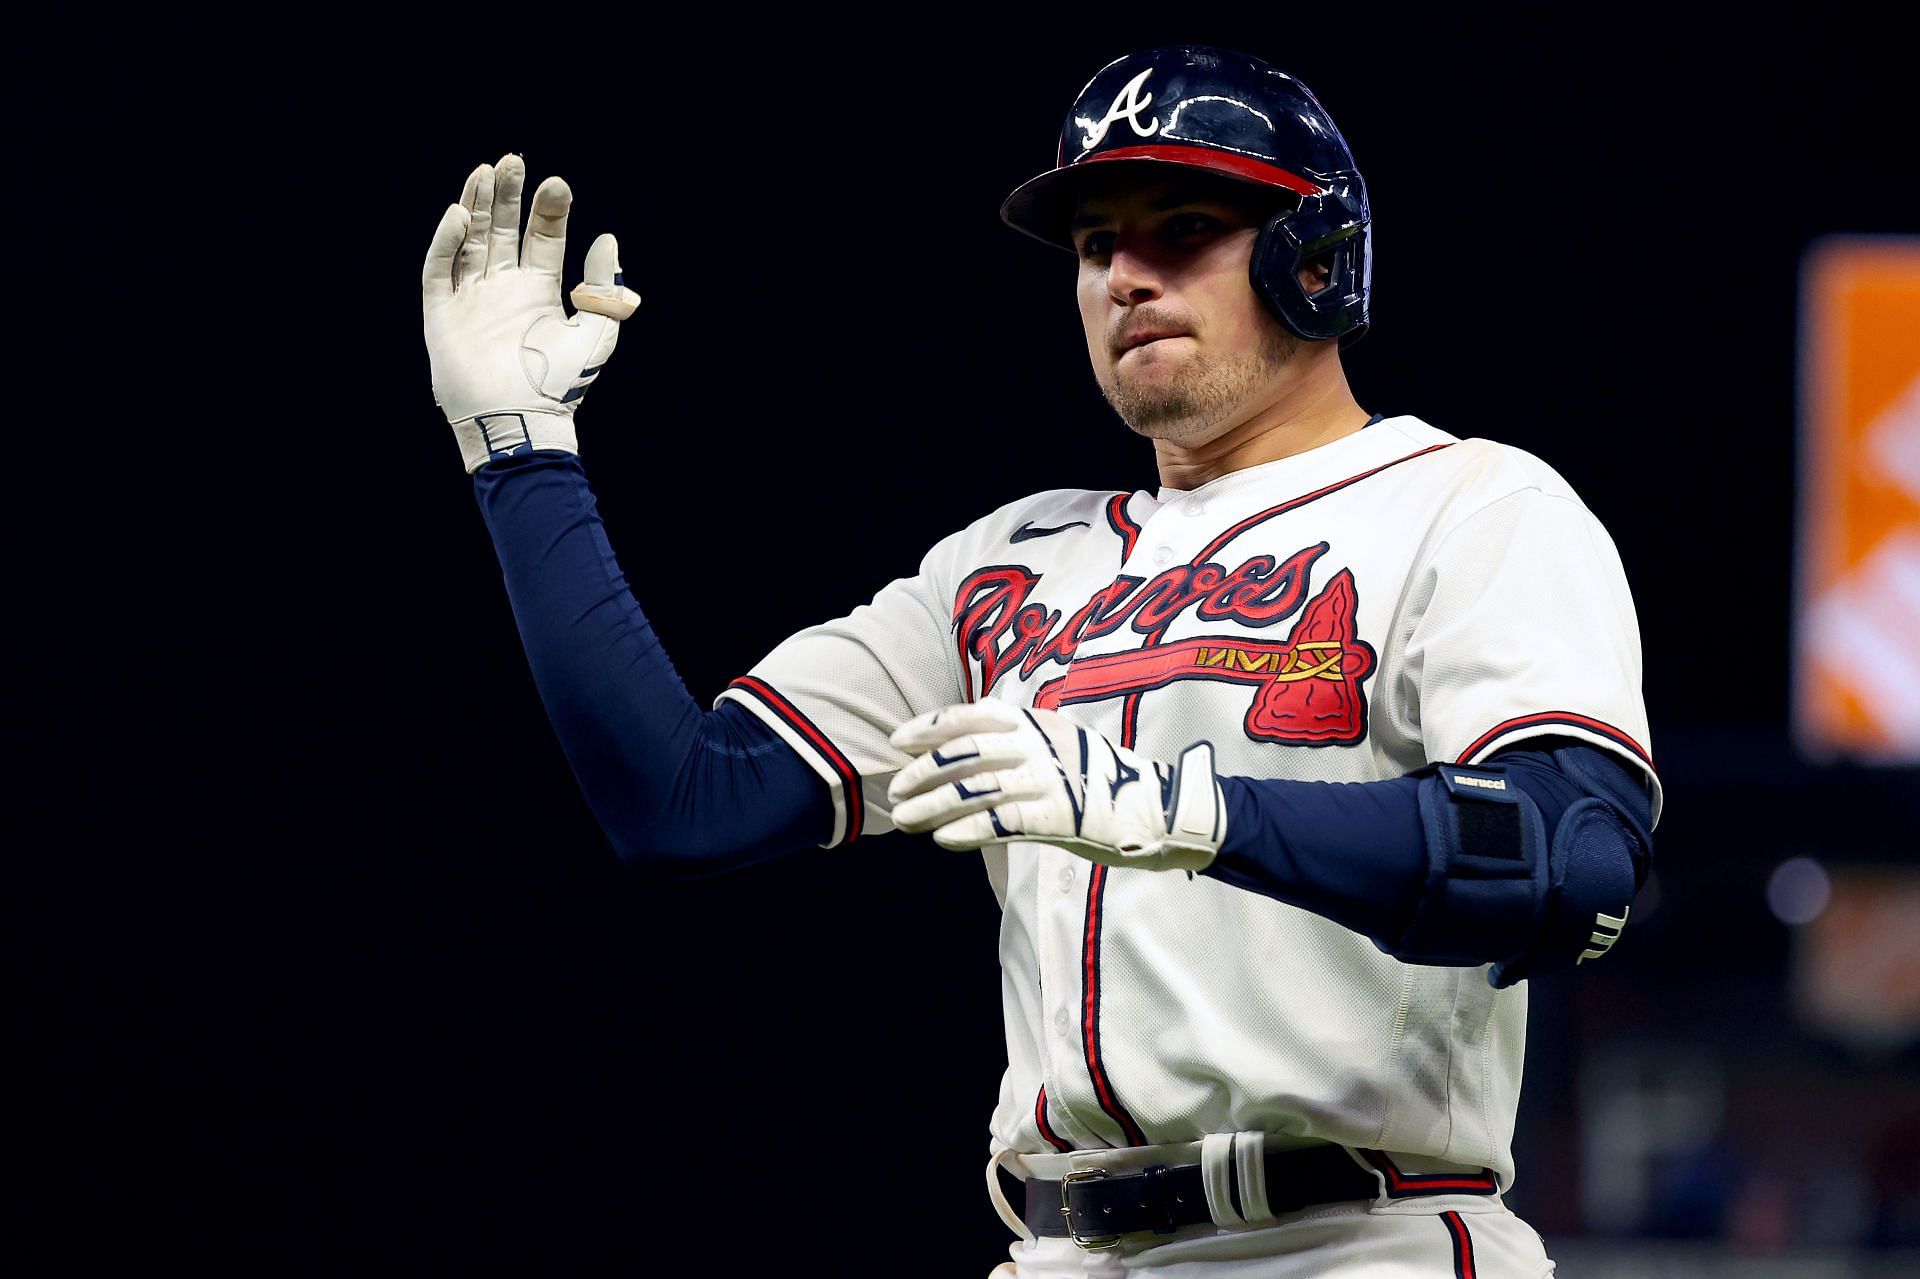 The 2023 Braves team imo is The Best Braves team that I've ever seen play  in my 20+ years of being a Braves fan. This team has been so special &  entertaining